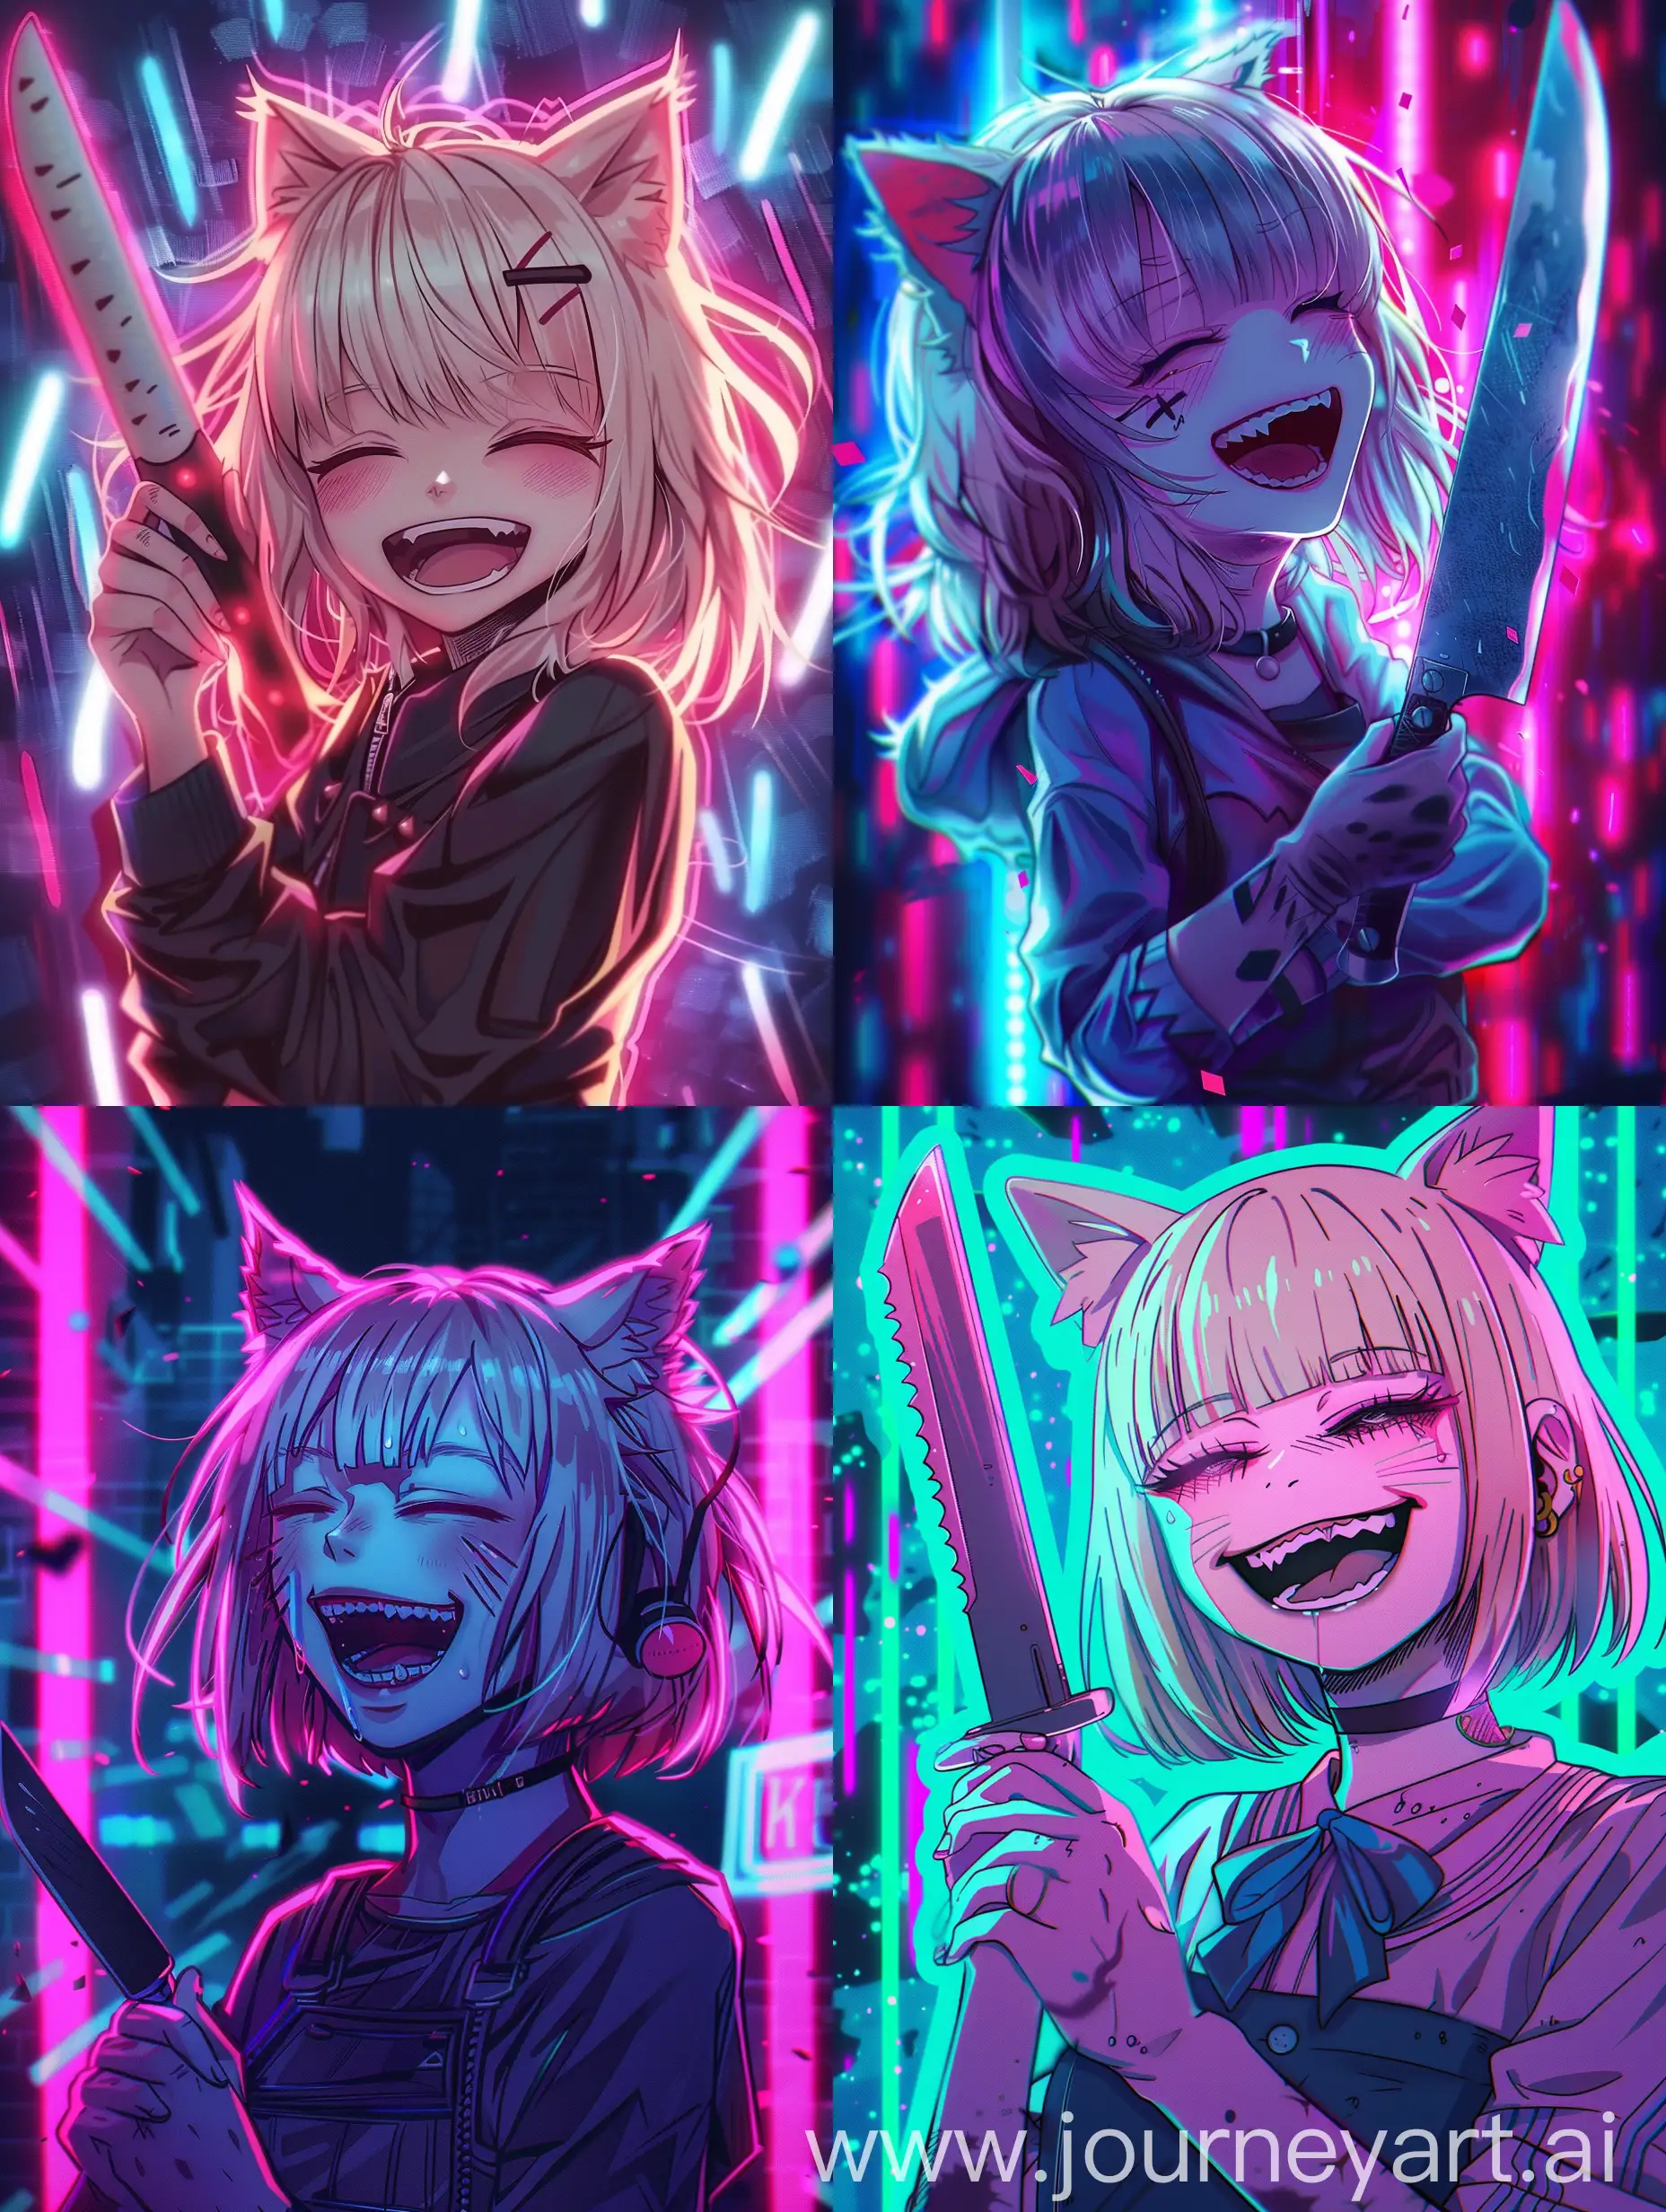 Laughing-Anime-Girl-with-Cat-Ears-Holding-a-Knife-on-Neon-Background